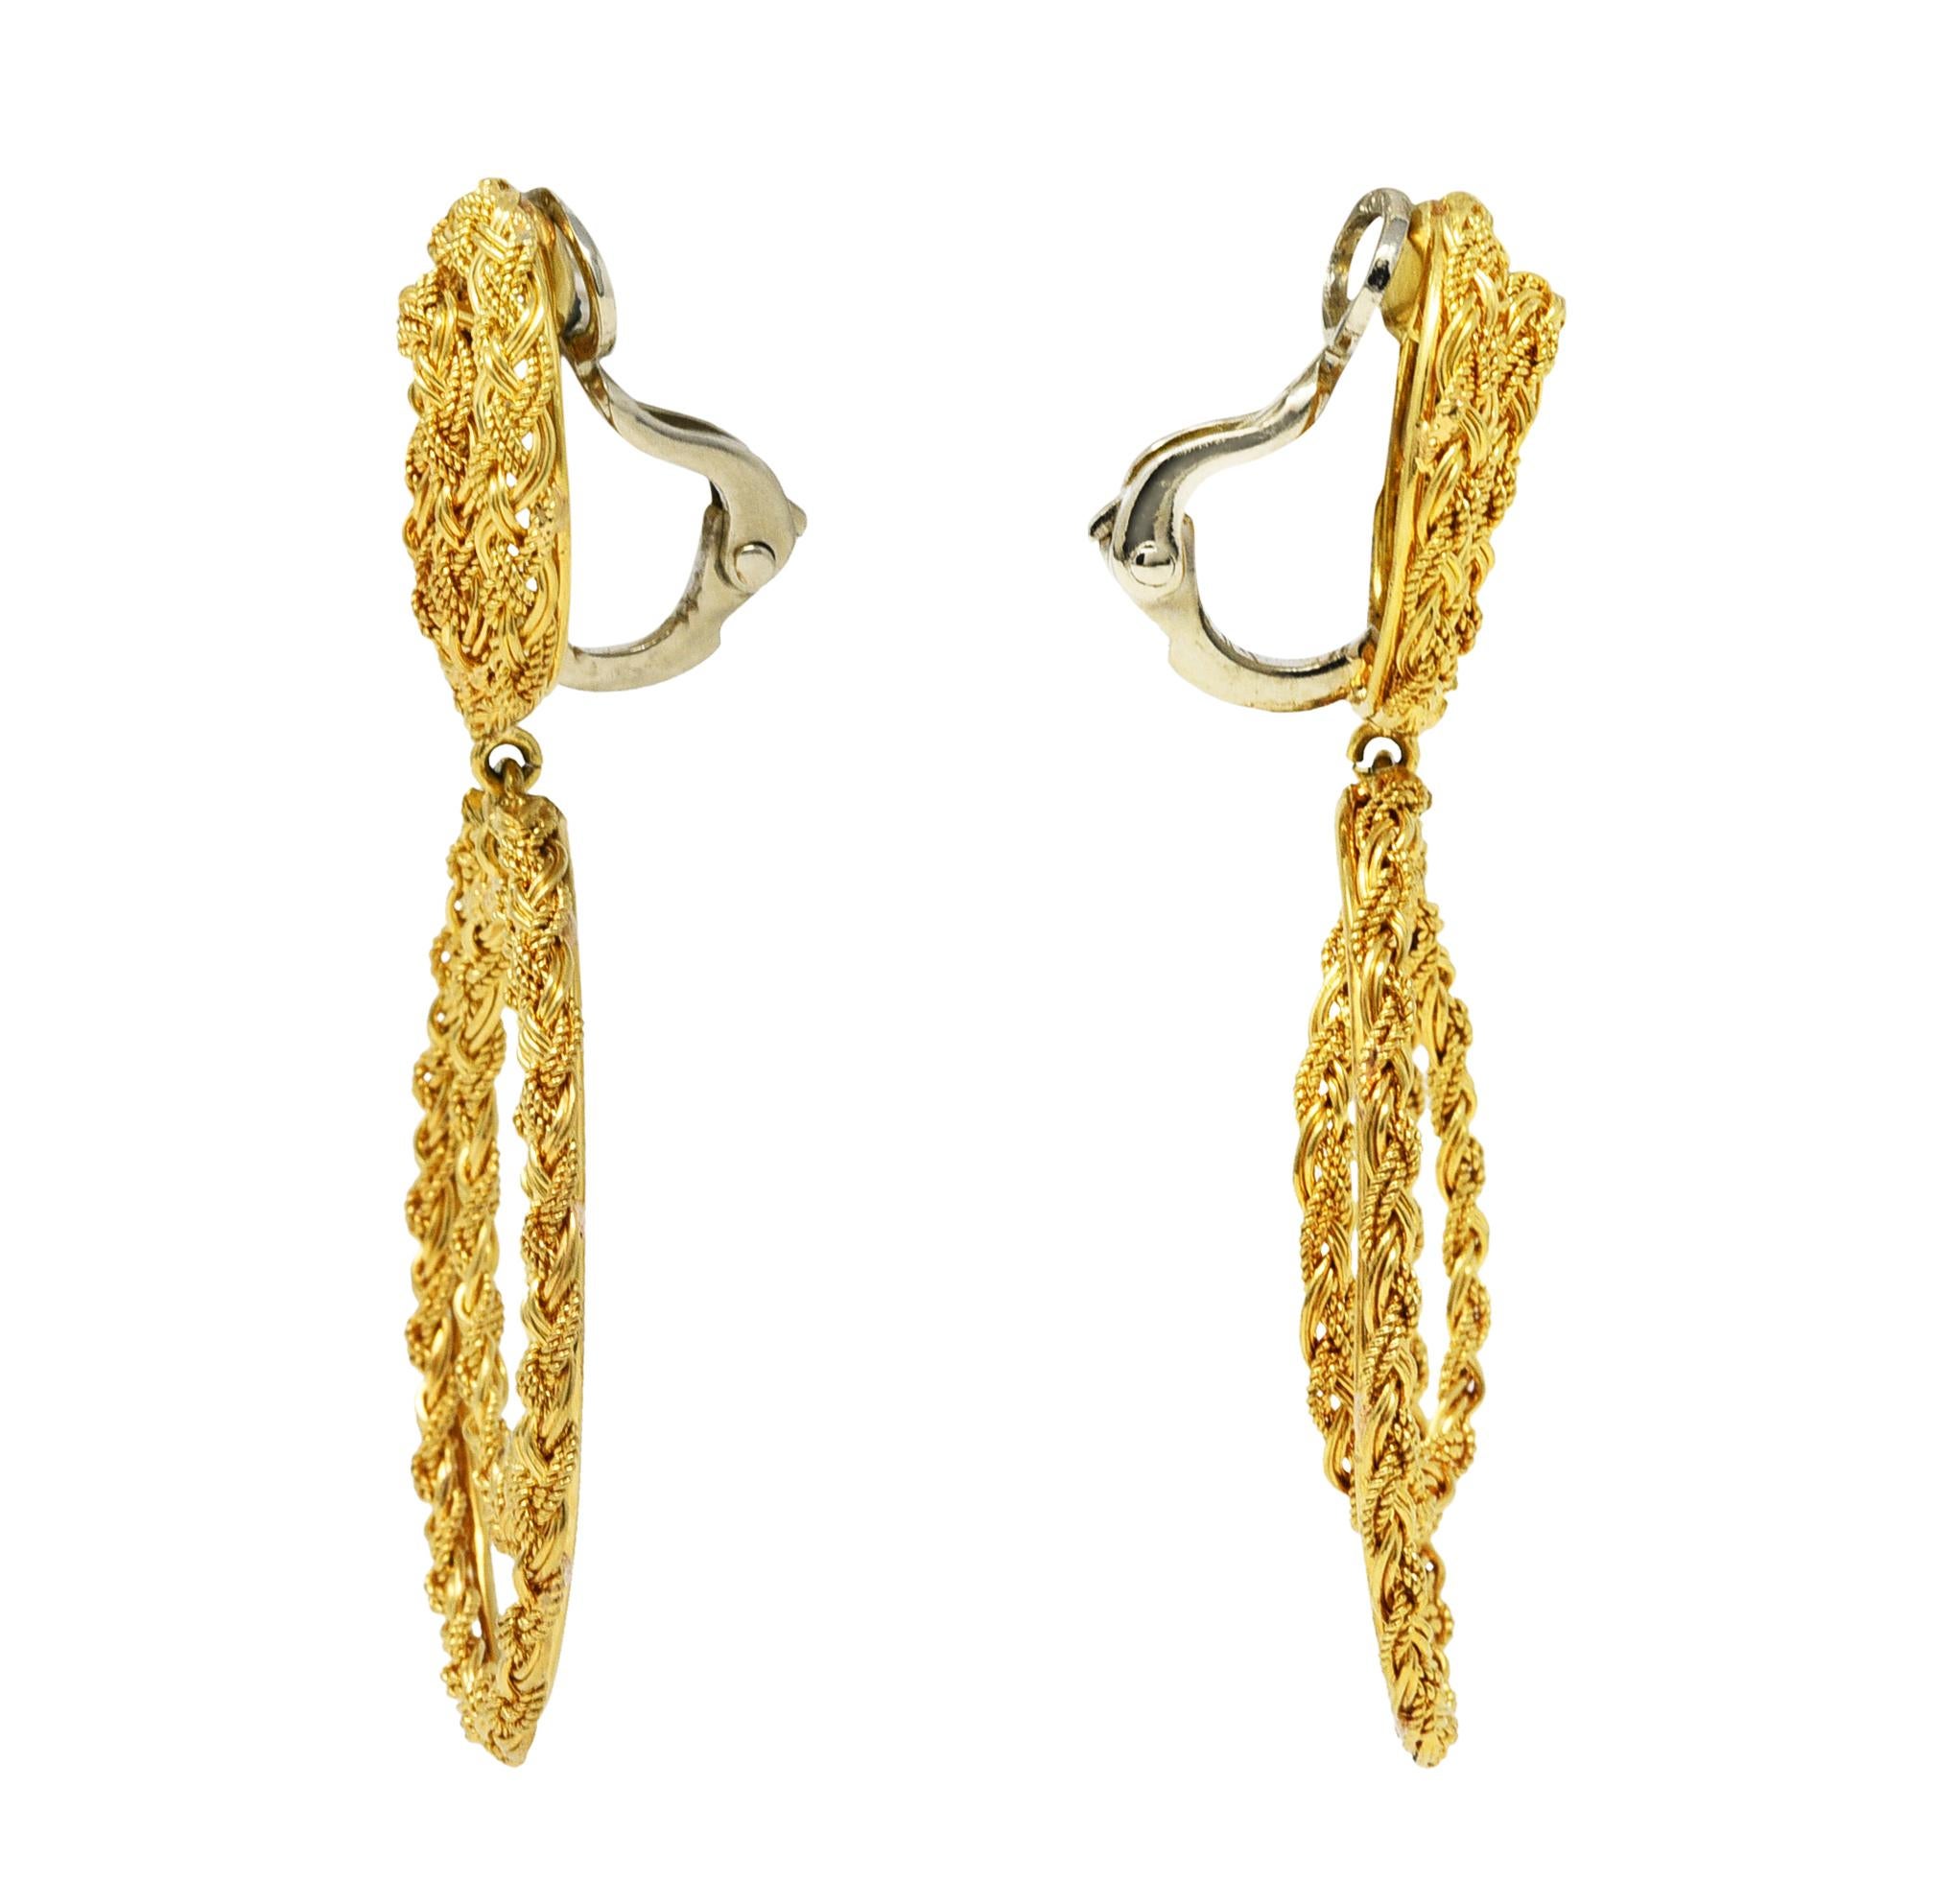 Doorknocker style earrings with a double loop oval surmount

Suspending a larger more articulated double loop drop

Entirely comprised of texturous and braided gold

Completed by white gold hinged backs

Stamped 18 for 18 karat gold

Circa: